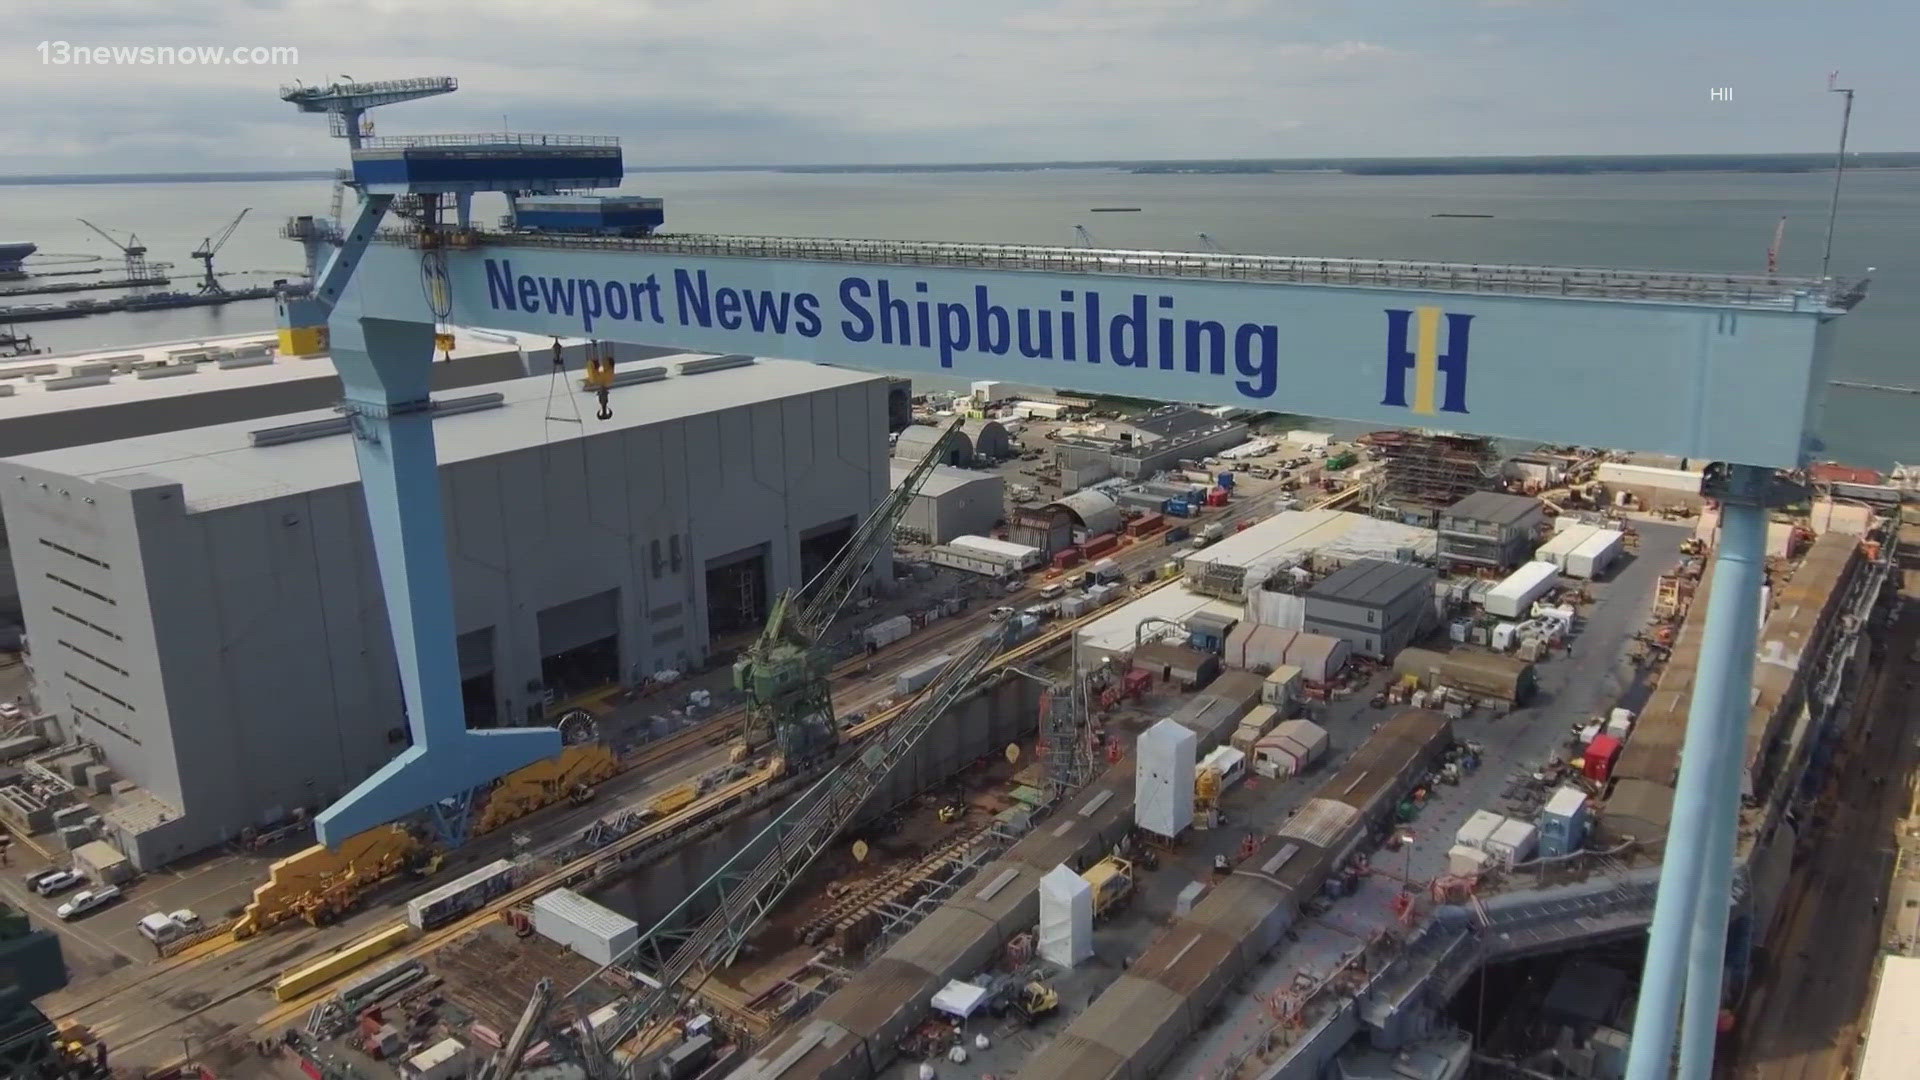 Getting an up-close look at how they turn steel into warships.